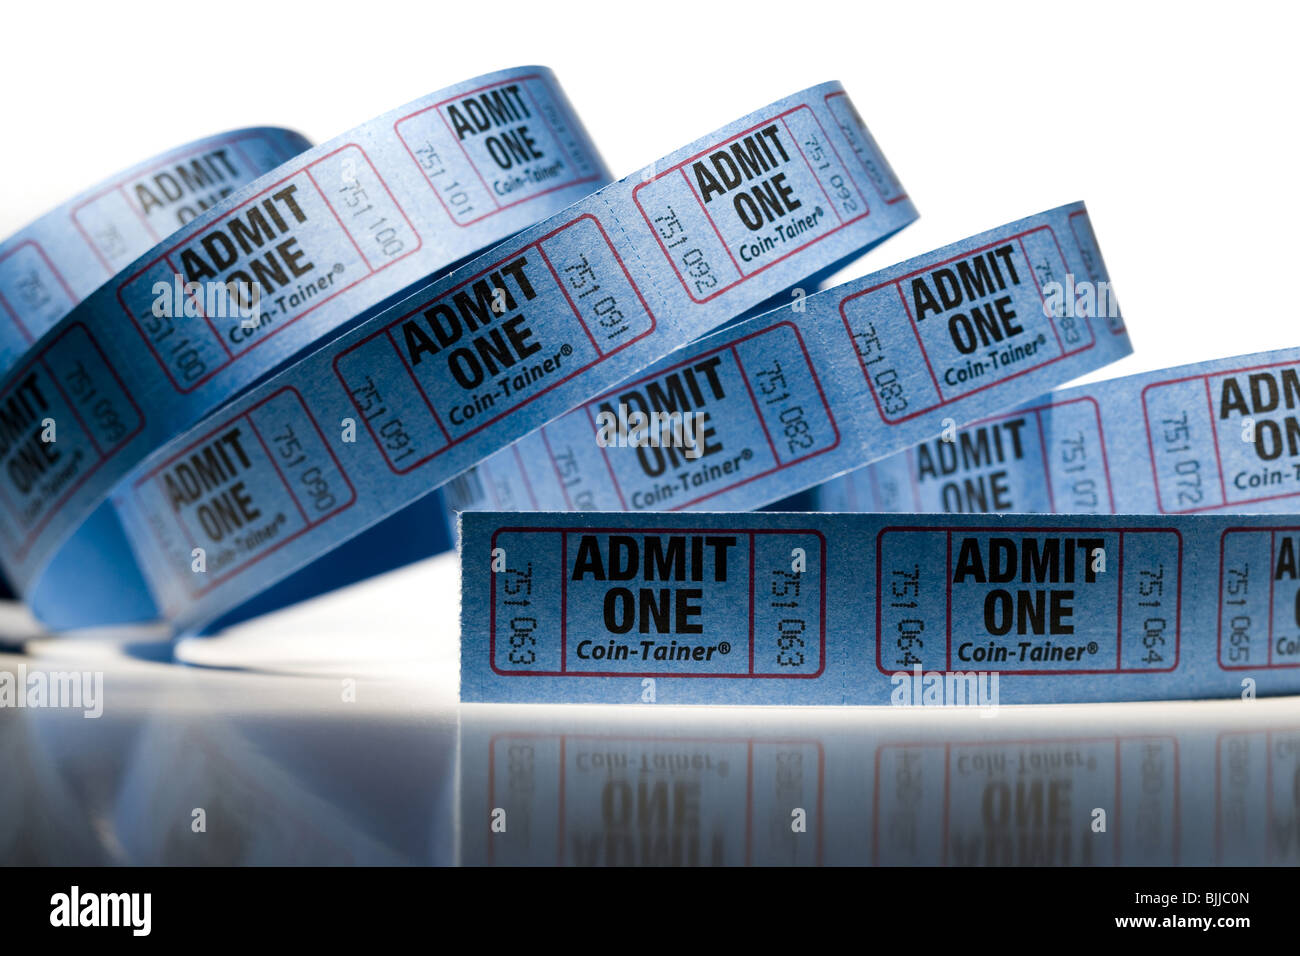 Admission tickets Stock Photo